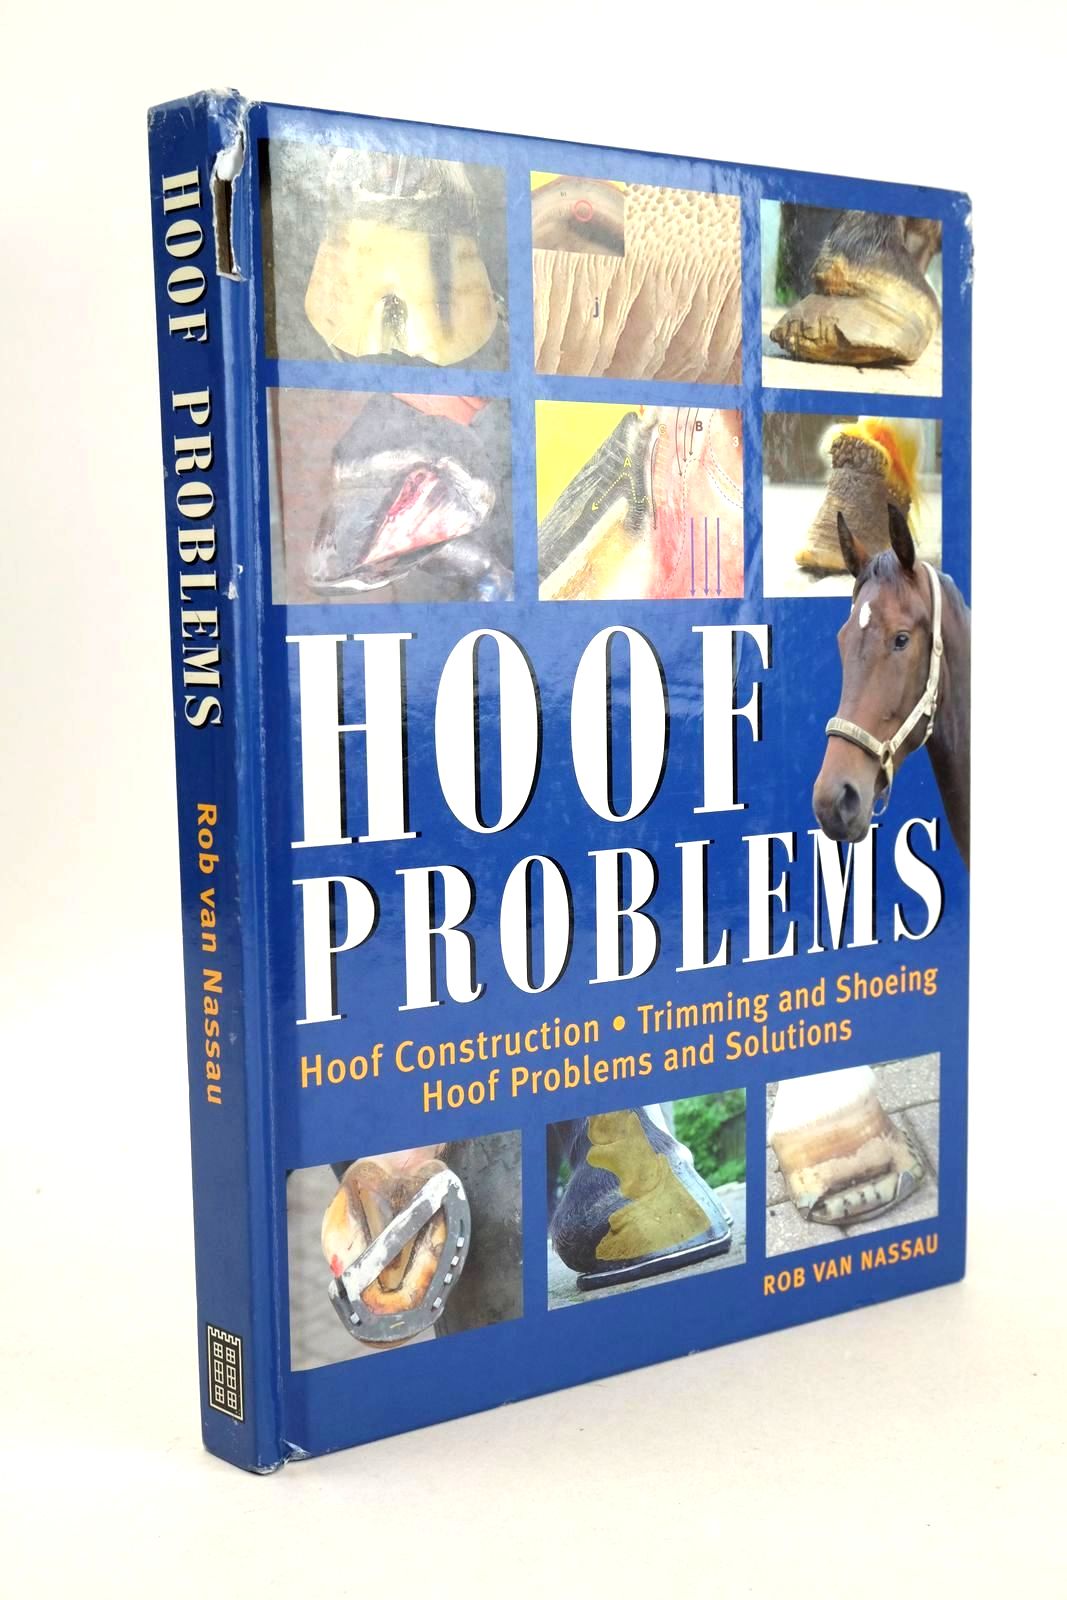 Photo of HOOF PROBLEMS written by Van Nassau, Rob published by Kenilworth Press (STOCK CODE: 1326411)  for sale by Stella & Rose's Books